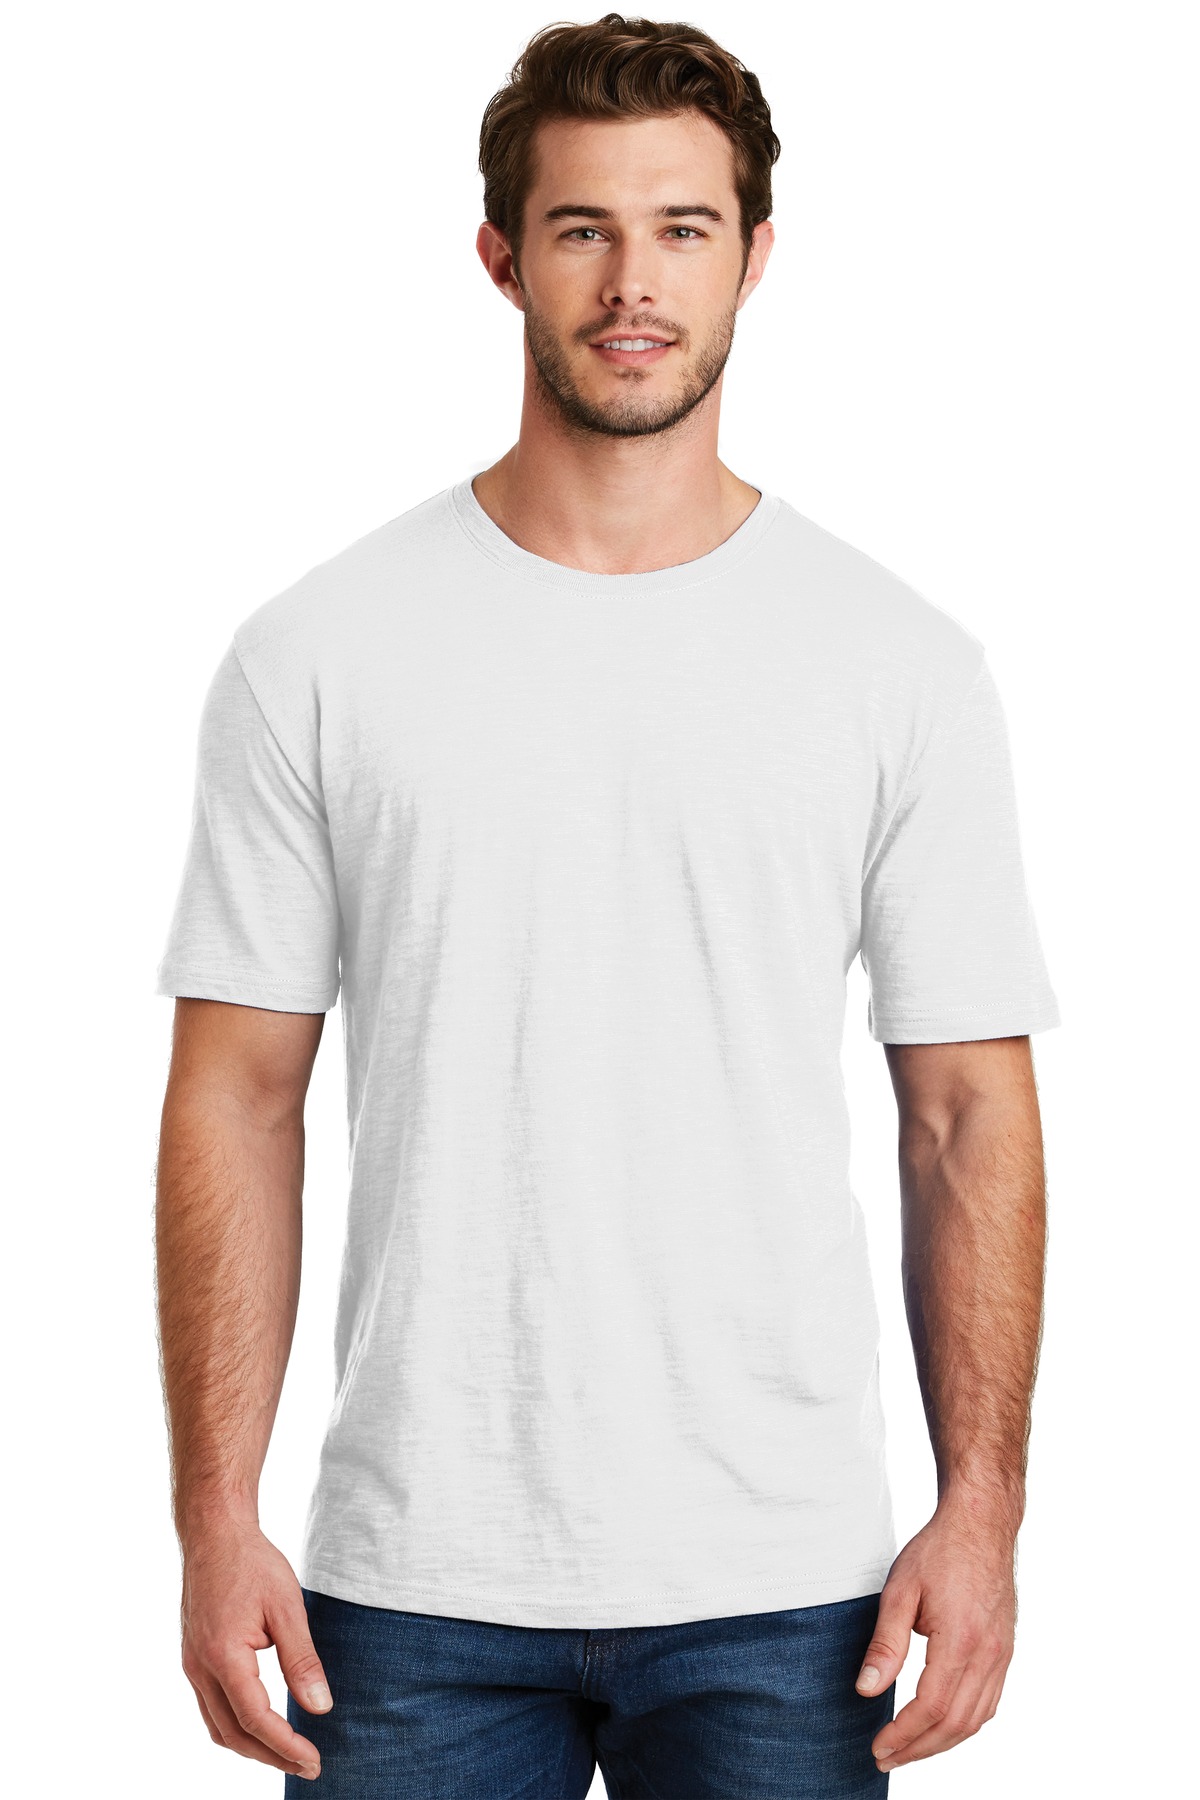 District Hospitality T-Shirts ® Perfect Blend®Tee.-District